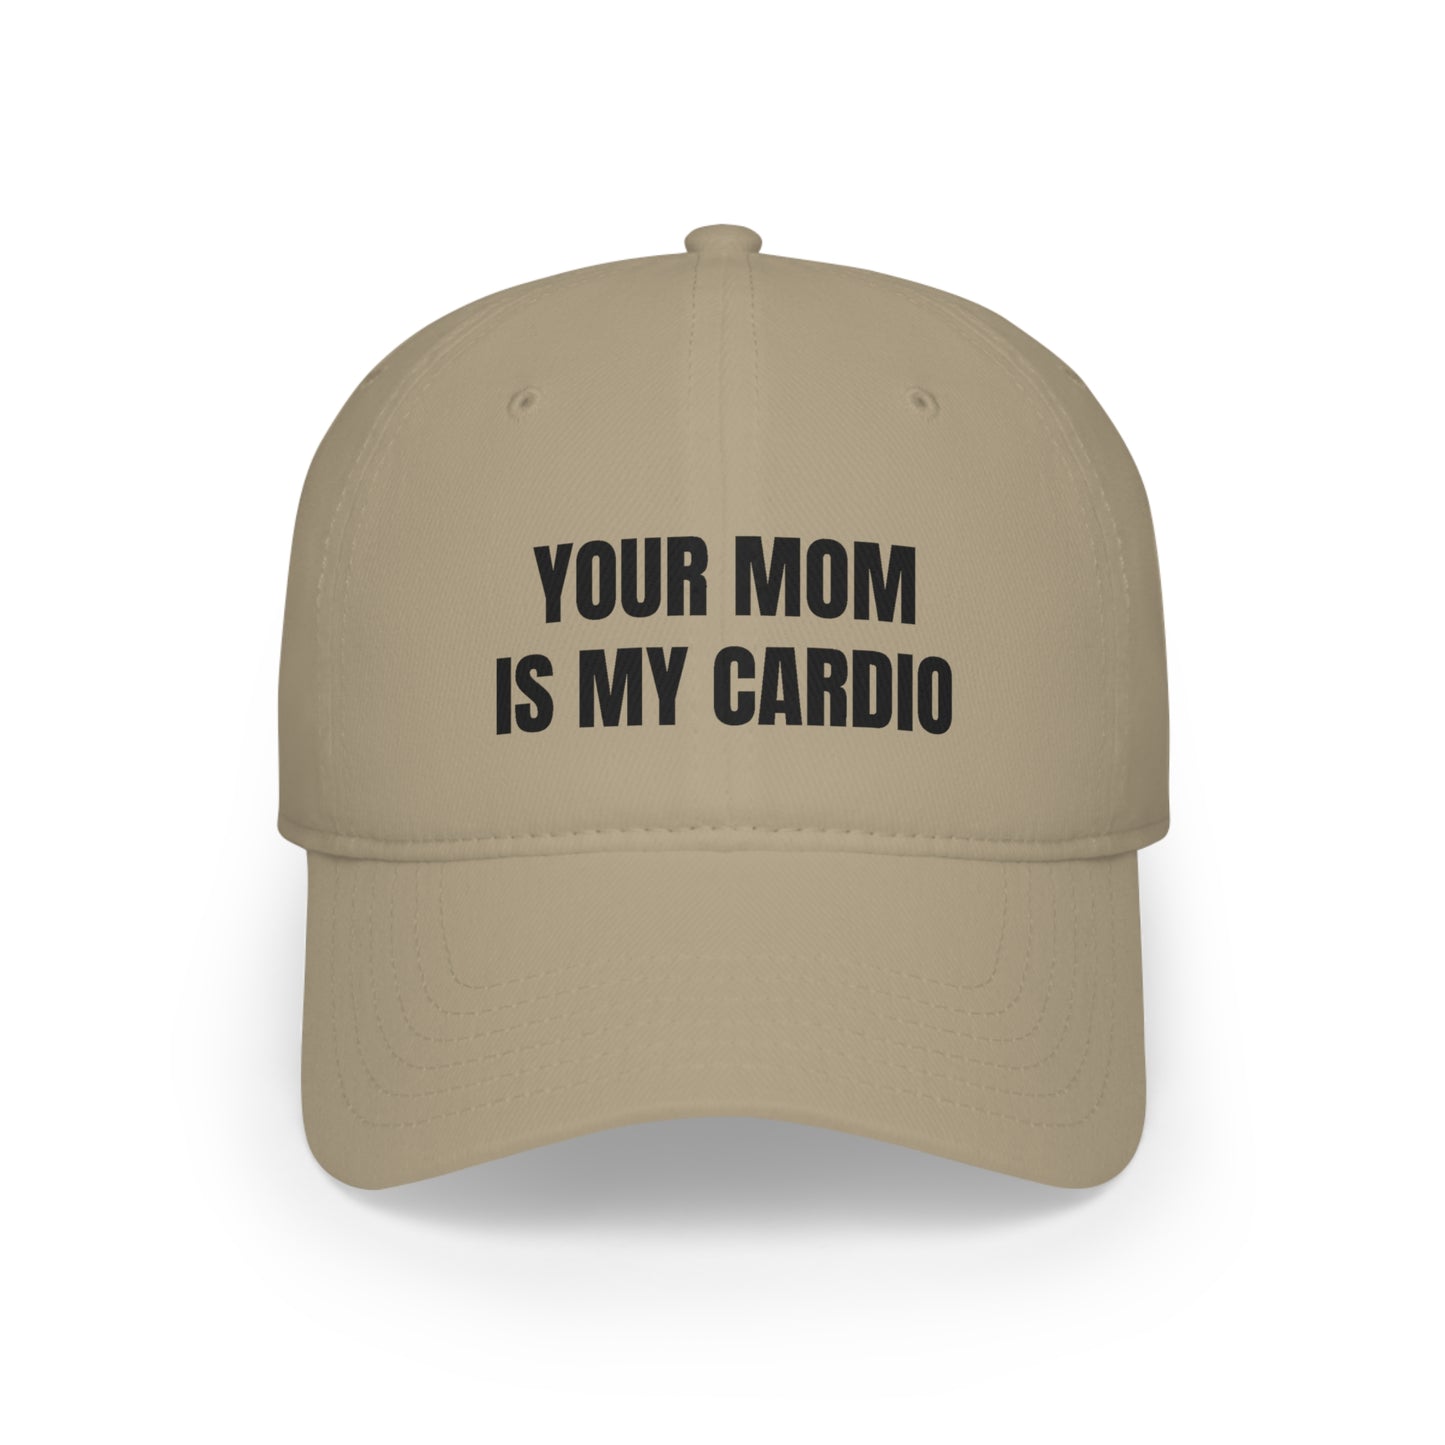 "Your Mom Is My Cardio" Men's Gym Hat